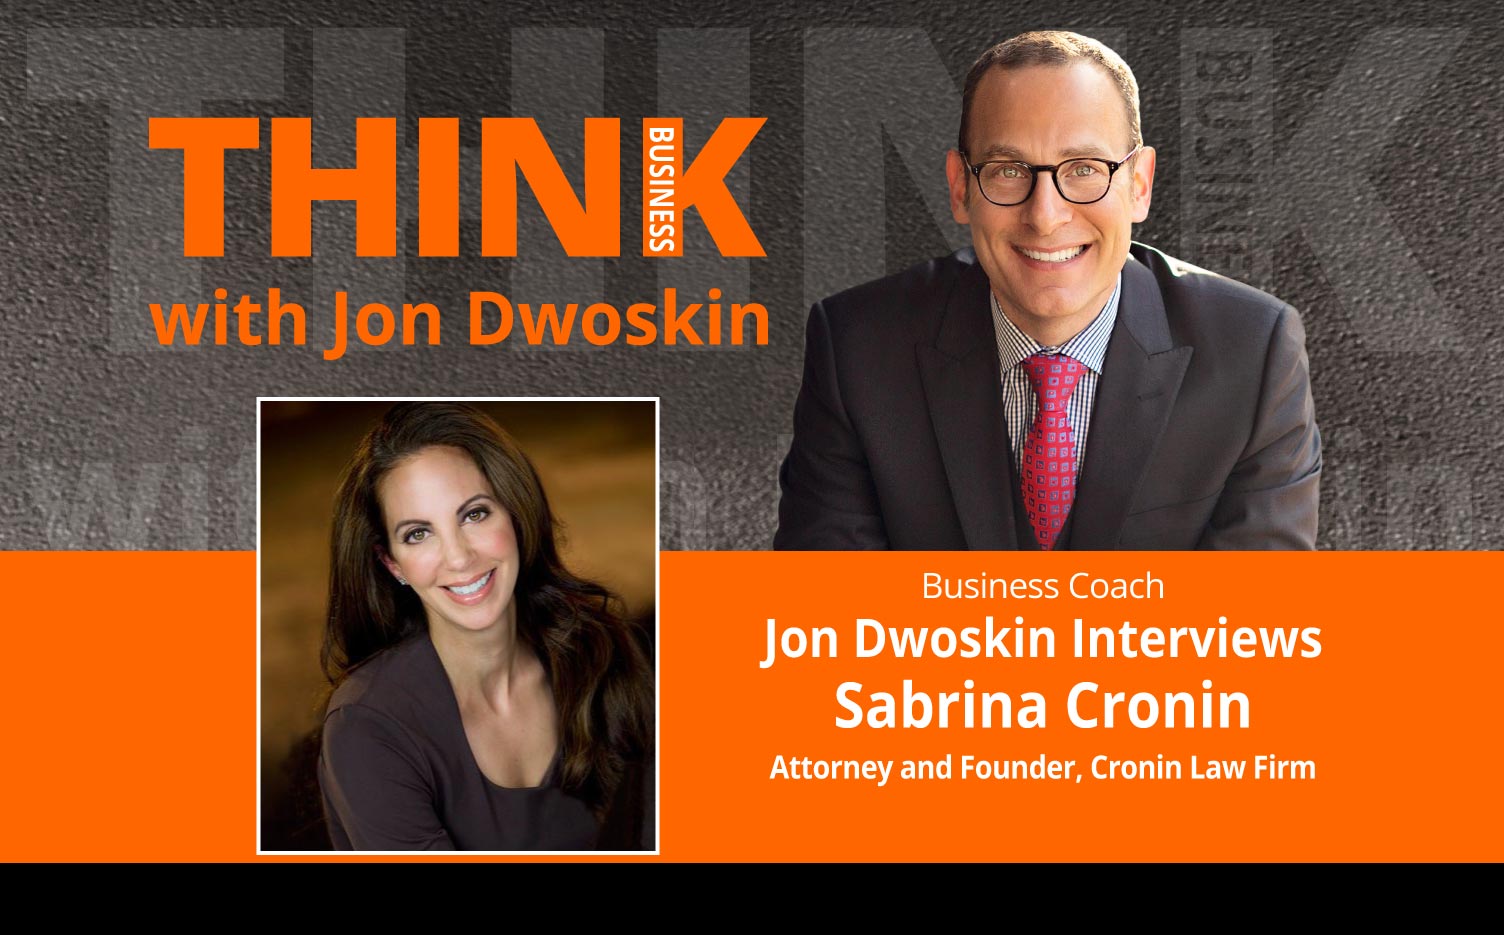 THINK Business Podcast: Jon Dwoskin Interviews Sabrina Cronin, Attorney and Founder, Cronin Law Firm